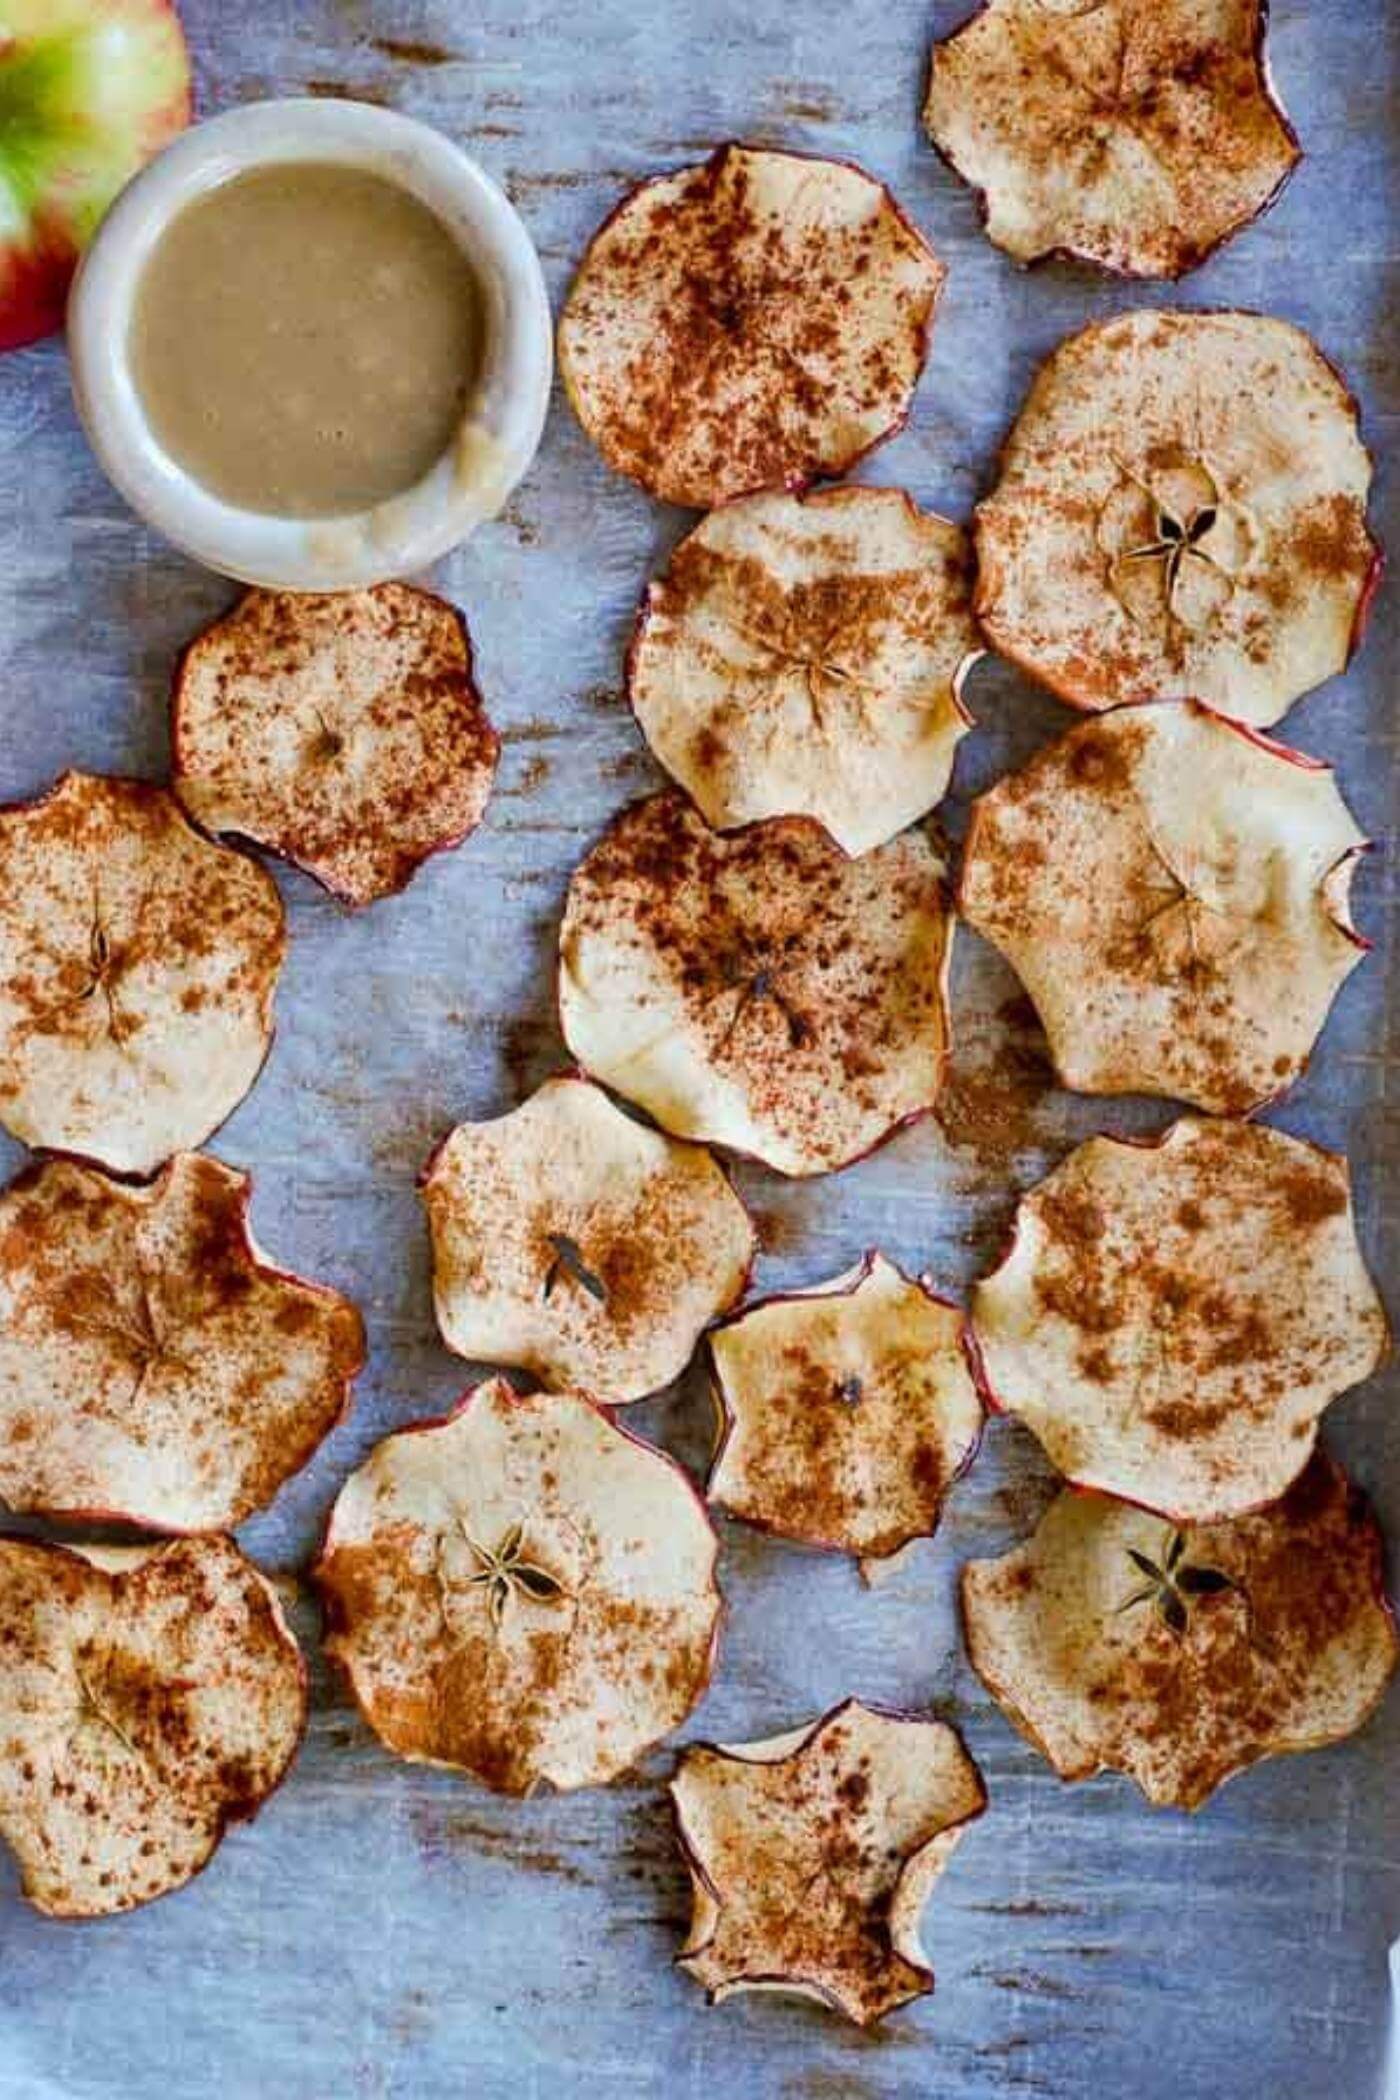 Apple Chips With Maple Tahini Dipping Sauce